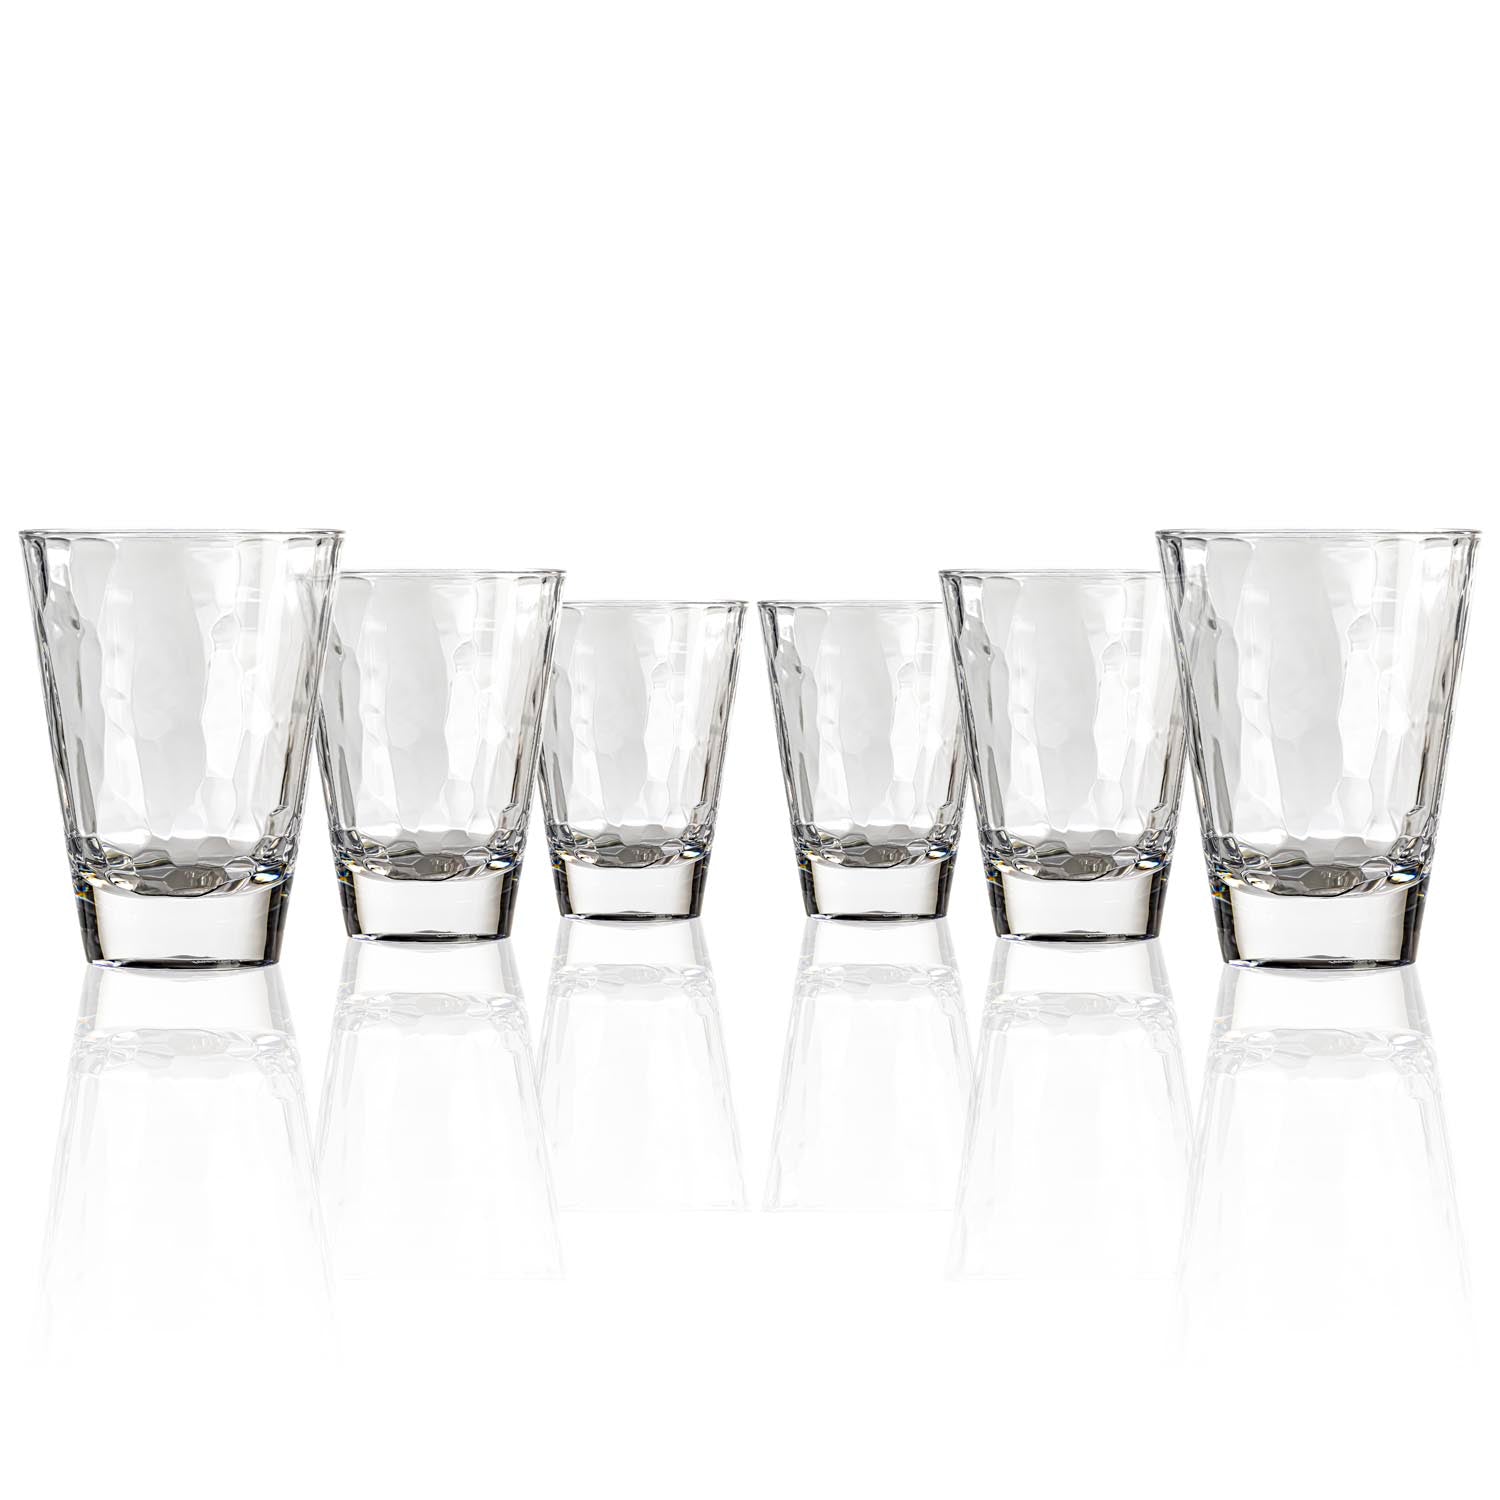 Set of 6, 14-ounce clear acrylic tumbler glasses from the Merritt Designs Cascade collection. Front view on white background